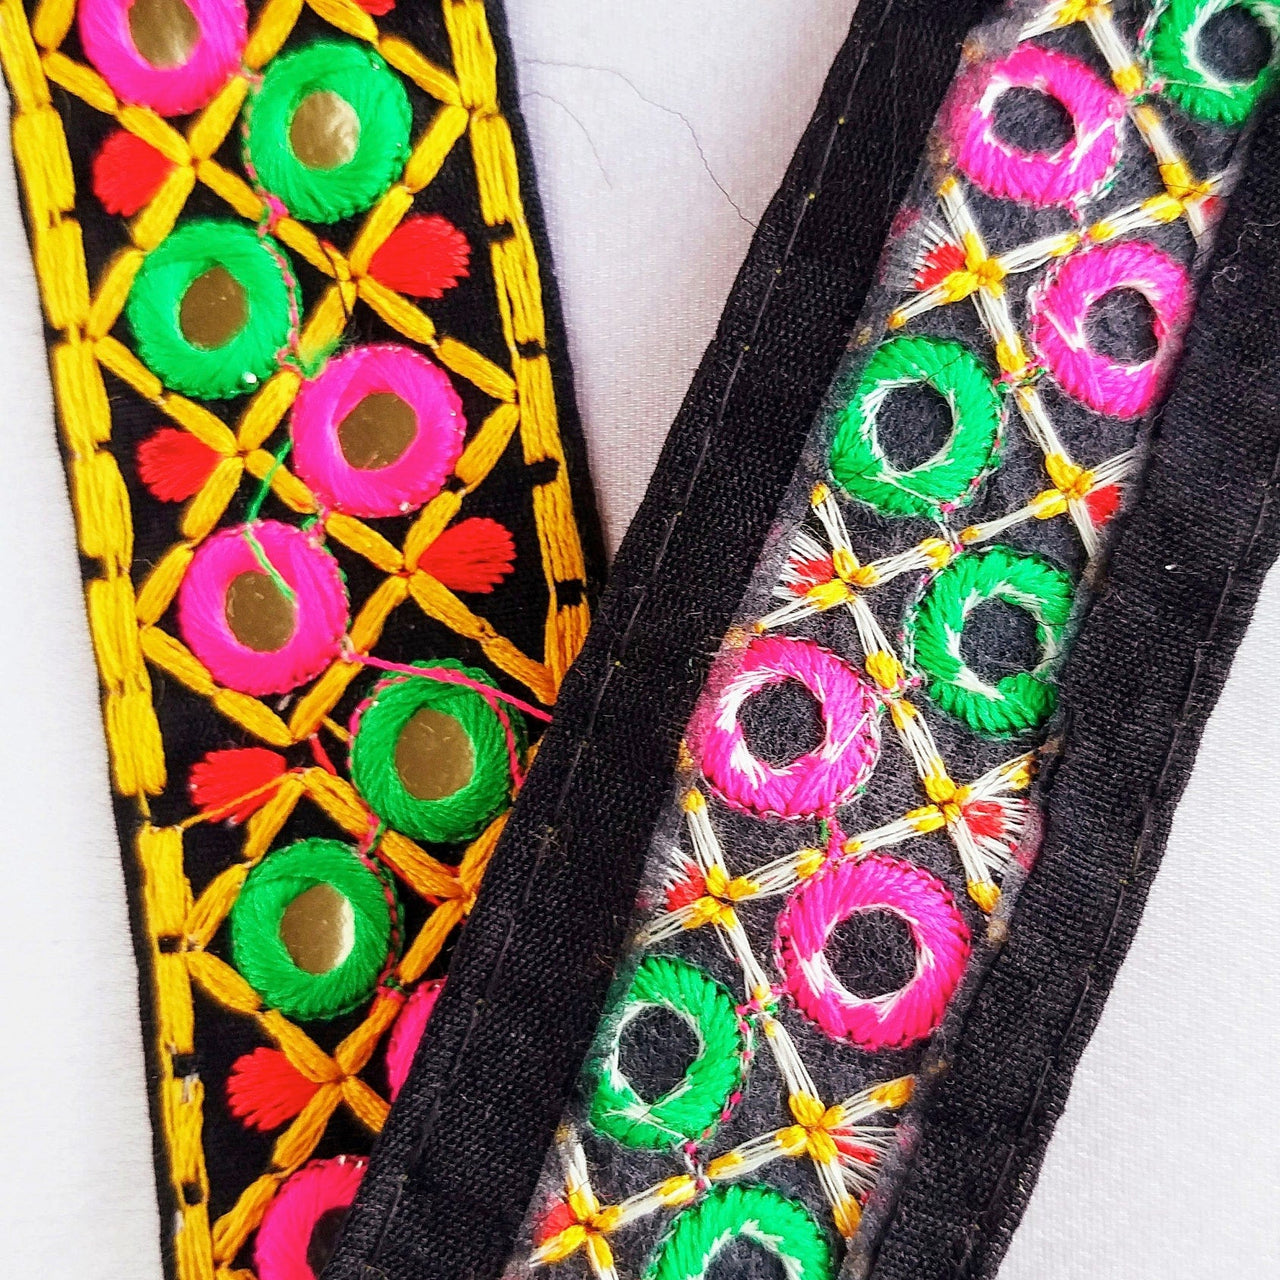 Black Cotton Fabric Mirrored Trim With Embroidery In Fuchsia Pink, Green, Red & Yellow Threads